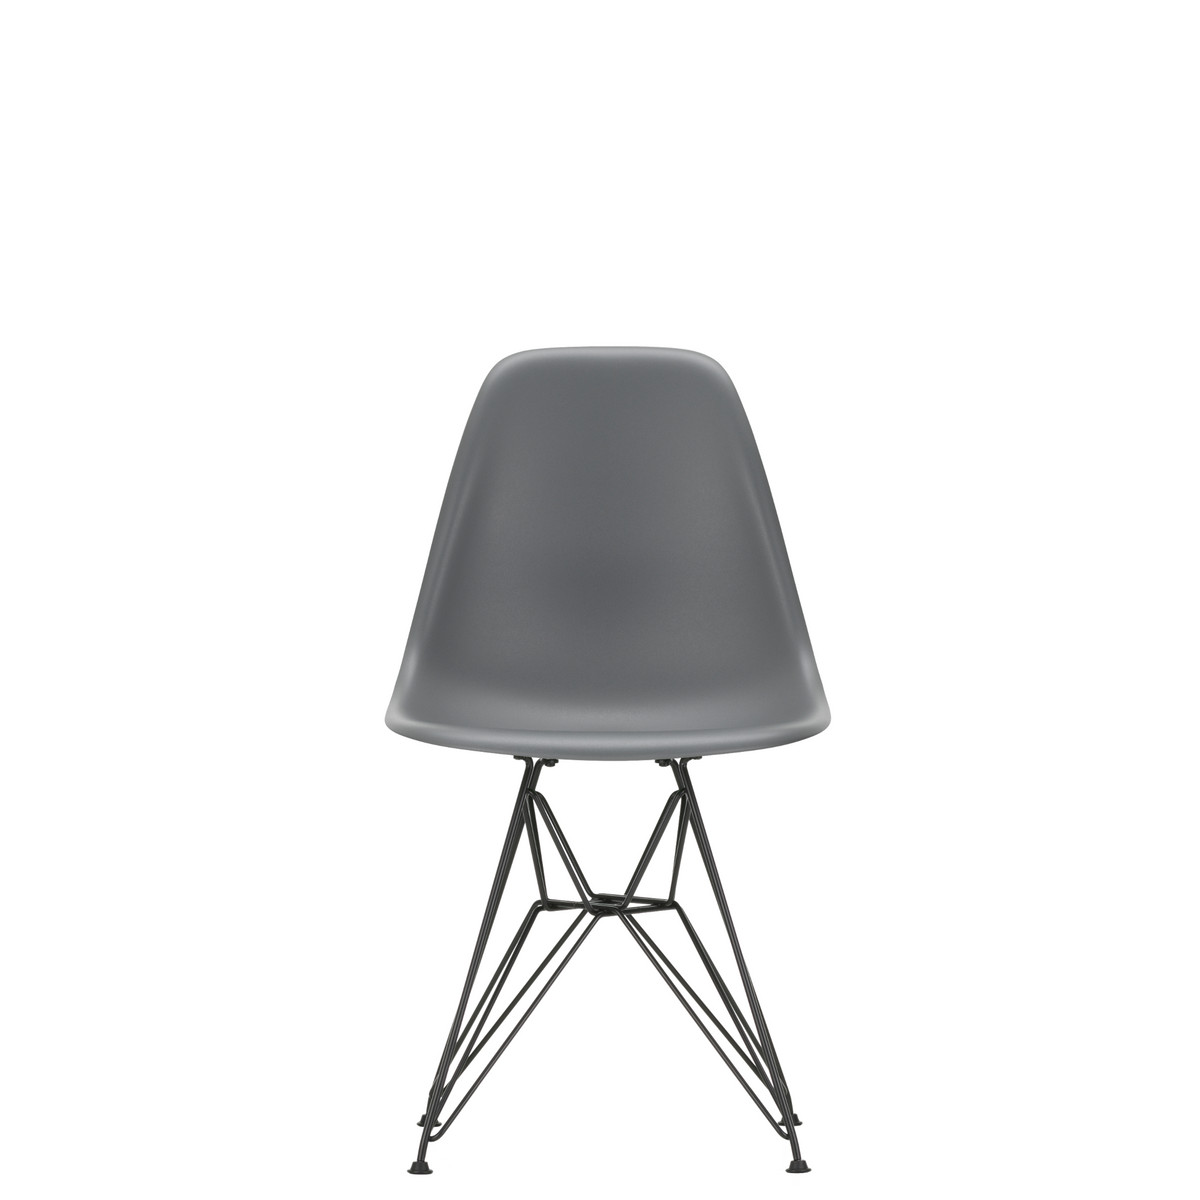 Vitra Eames Plastic Side Chair DSR Powder Coated for Outdoor Use Granite Grey Shell Black Powdercoated Base